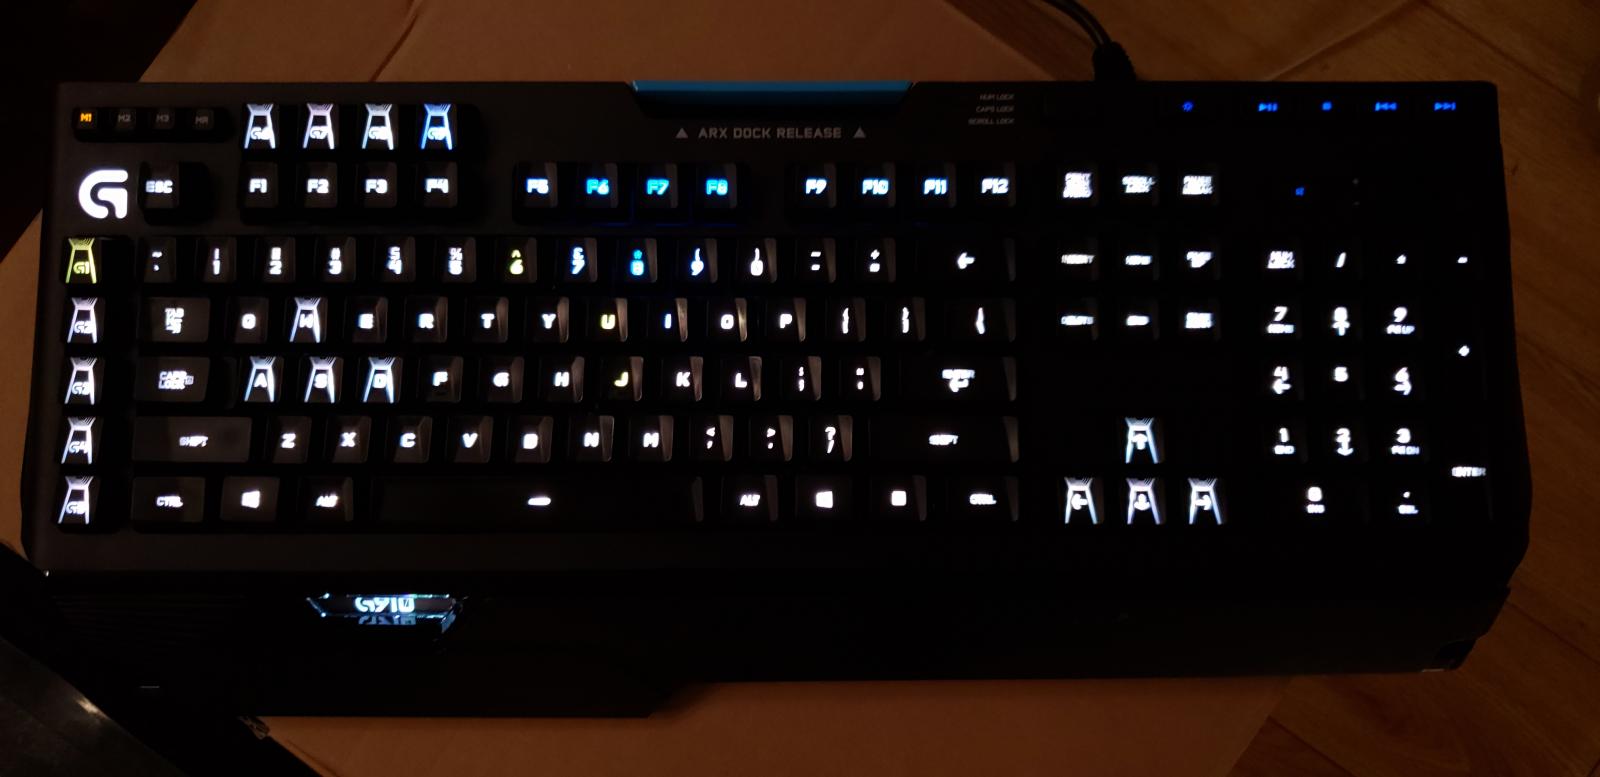 For sale Logitech G910 Orion Spark RGB mechanical keyboard (see notes)